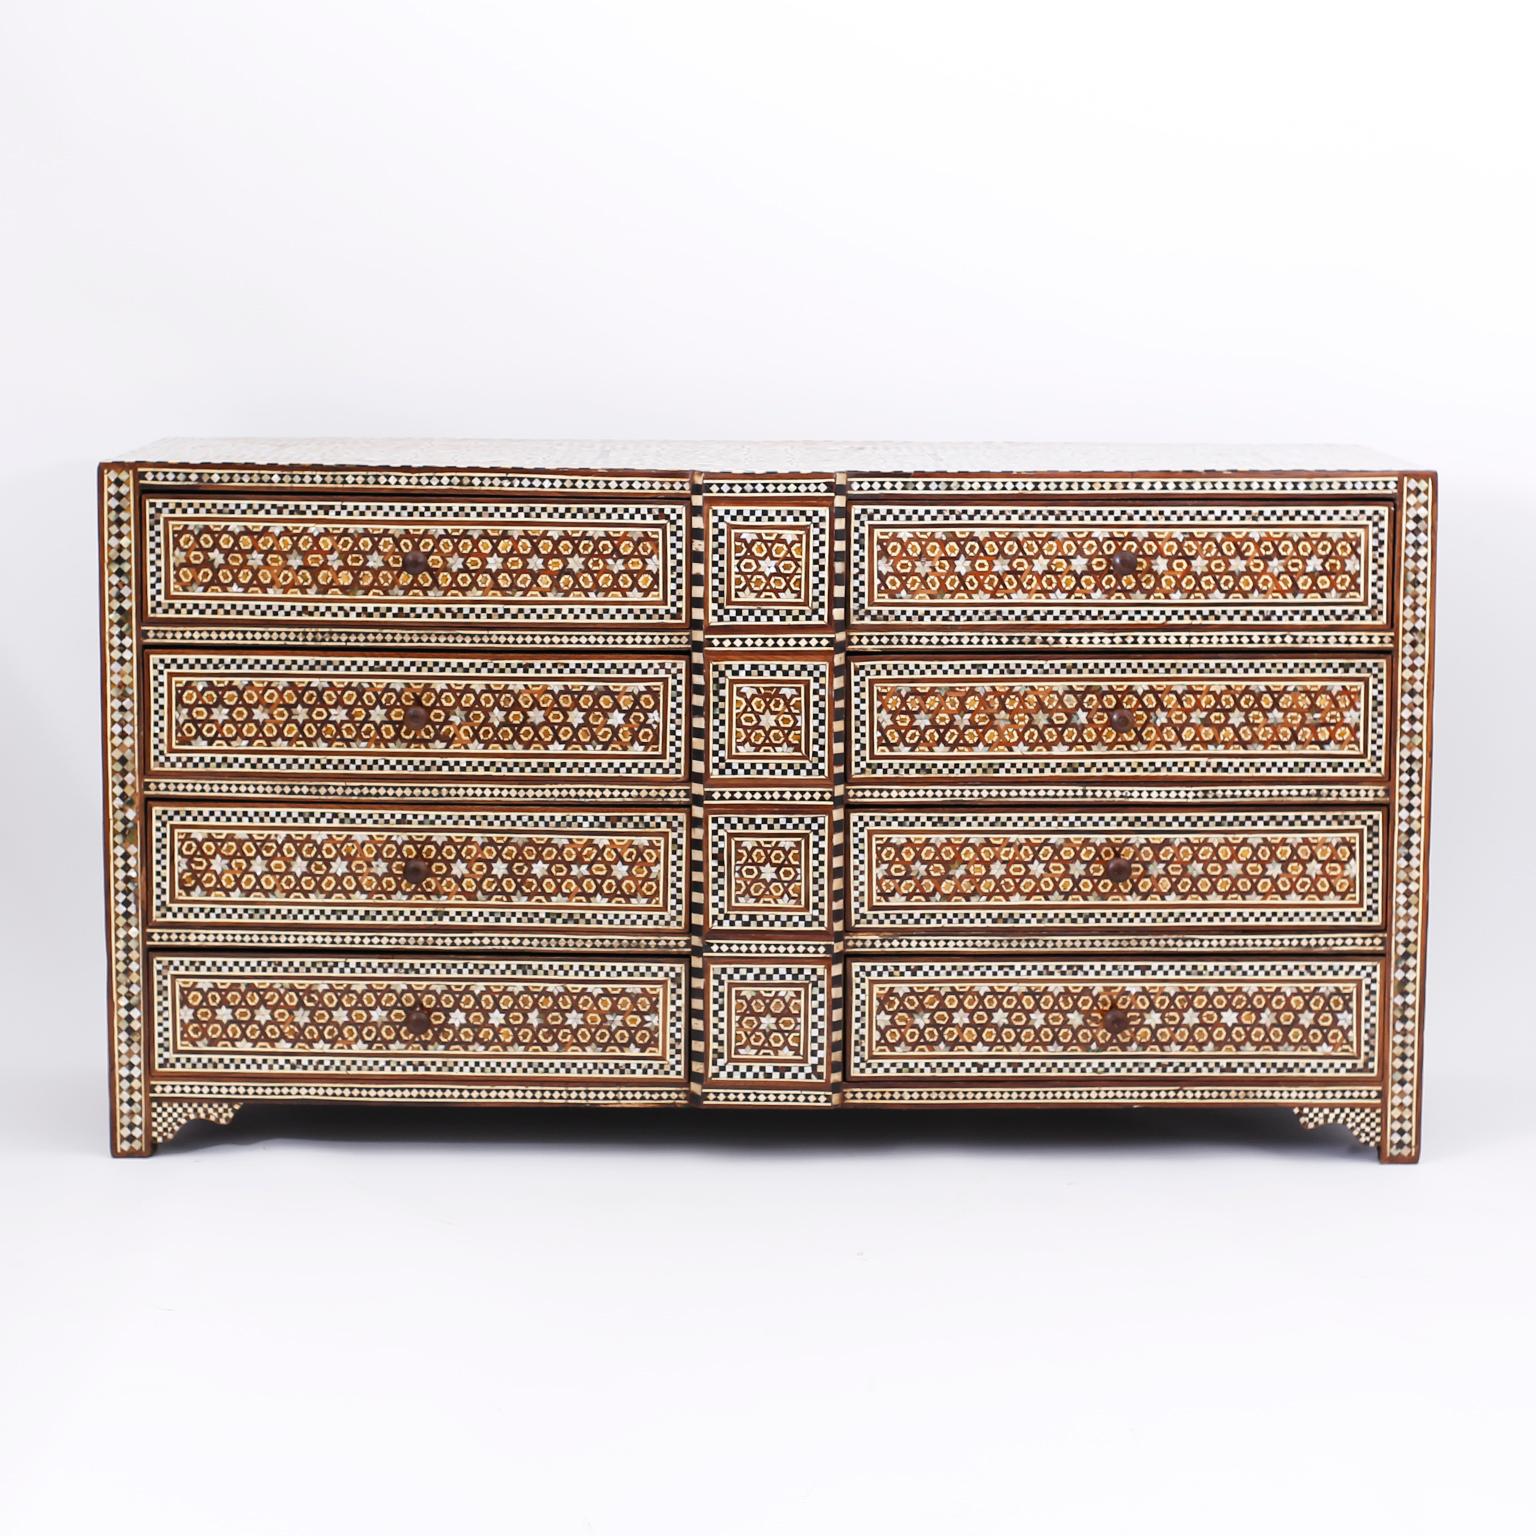 Pair of Syrian mahogany chests of drawers or eight-drawer commodes completely clad with inlaid and marquetry mother of pearl, bone, and ebony panels composed in geometric designs with elaborate borders. The sides have inset panels and the feet have